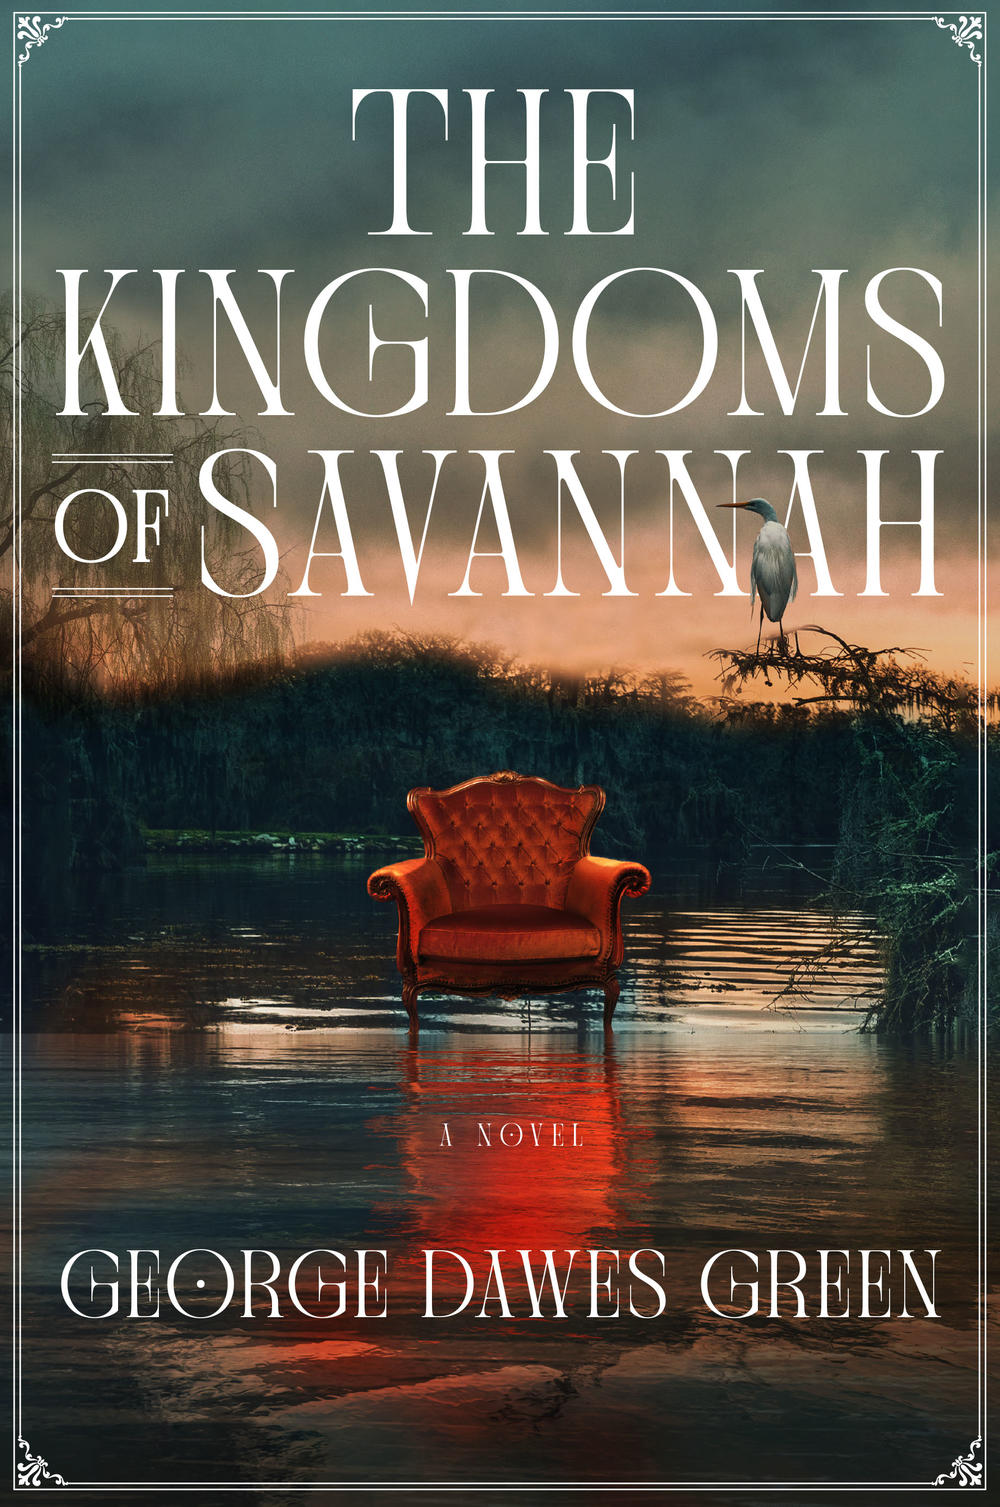 The cover of the book "The Kingdoms of Savannah" depicts an empty chair floating on water.